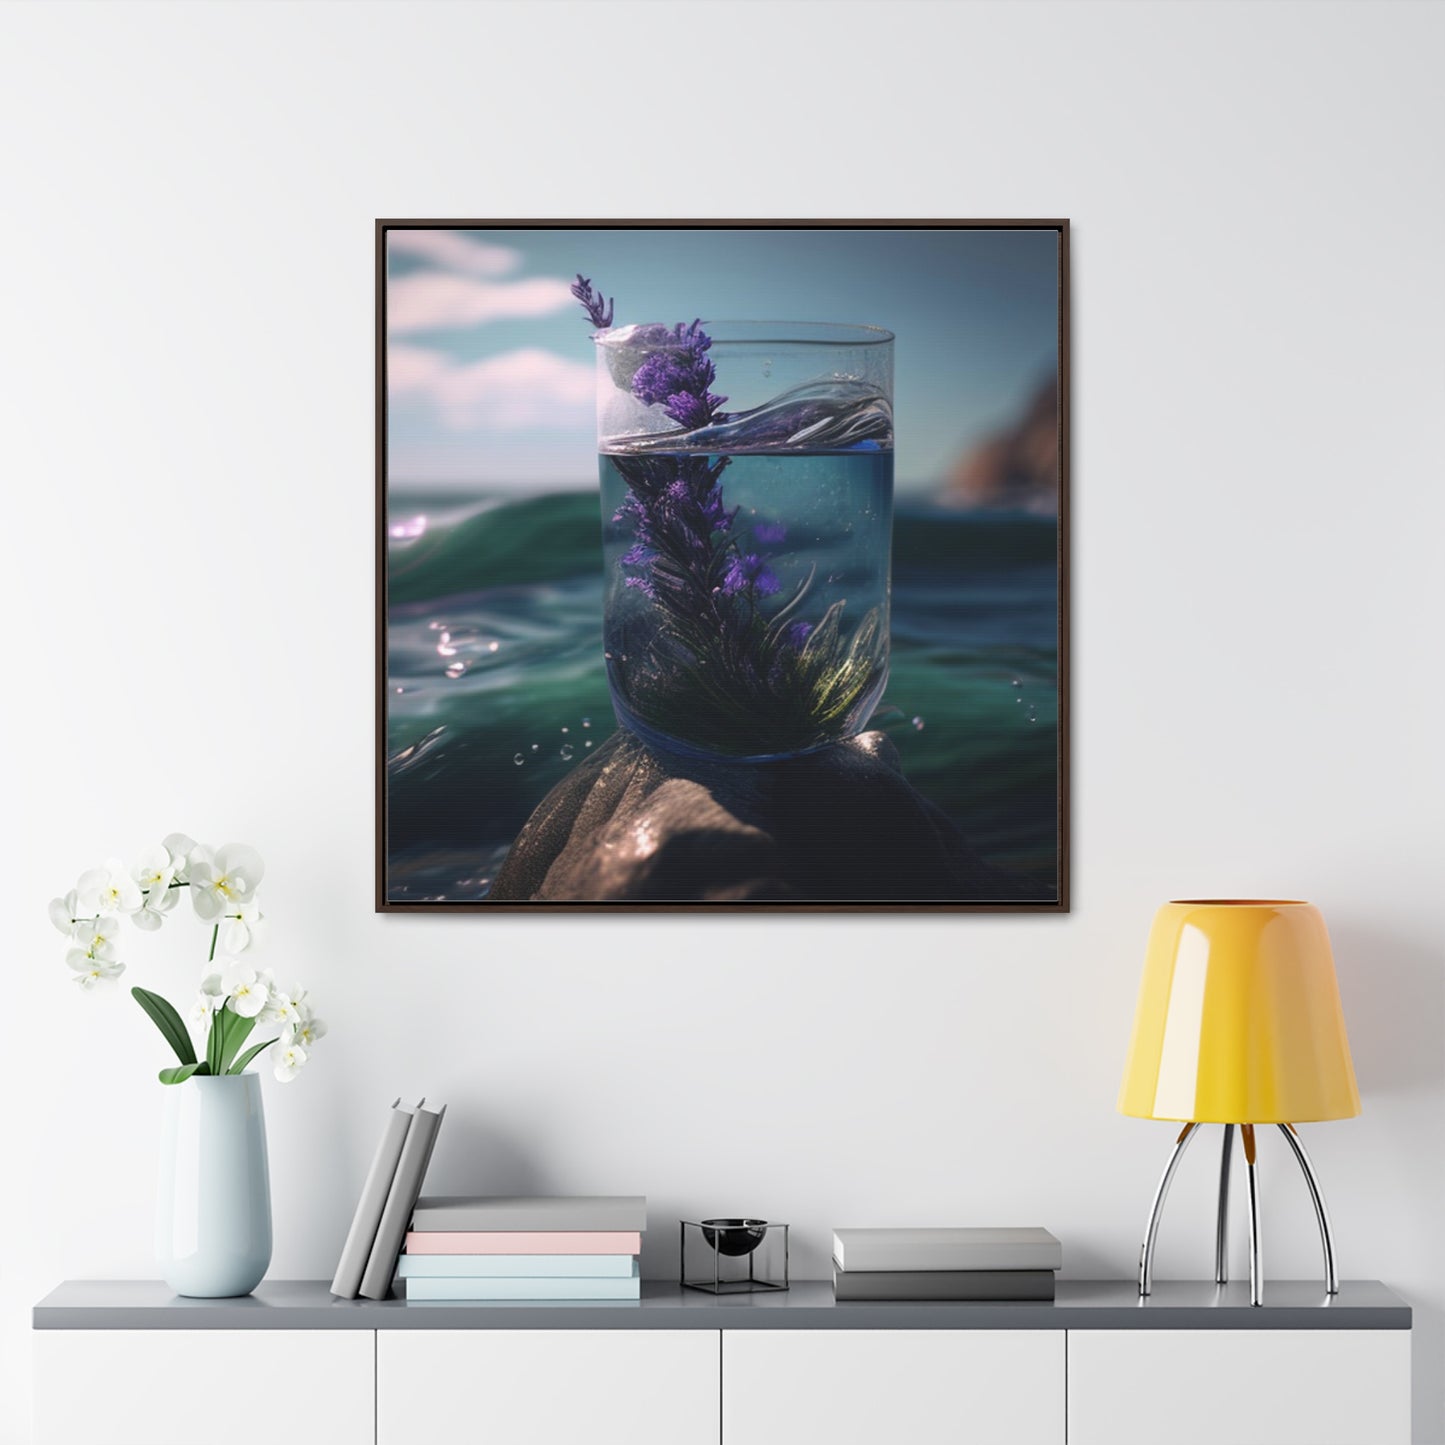 Gallery Canvas Wraps, Square Frame Lavender in a vase 2